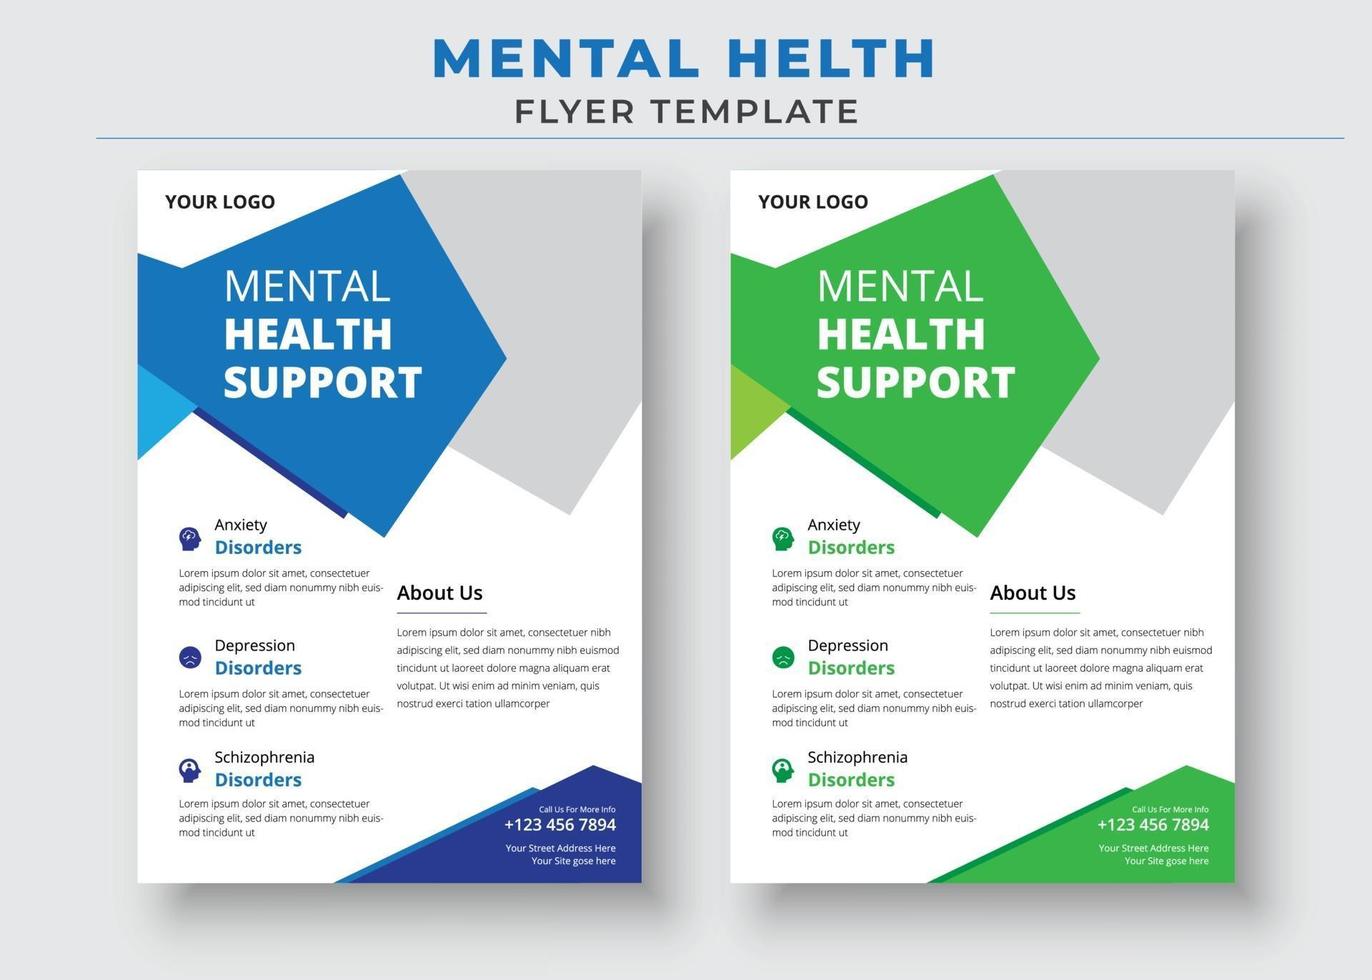 Mental Health Support Flyer Template, support group flyer and poster vector